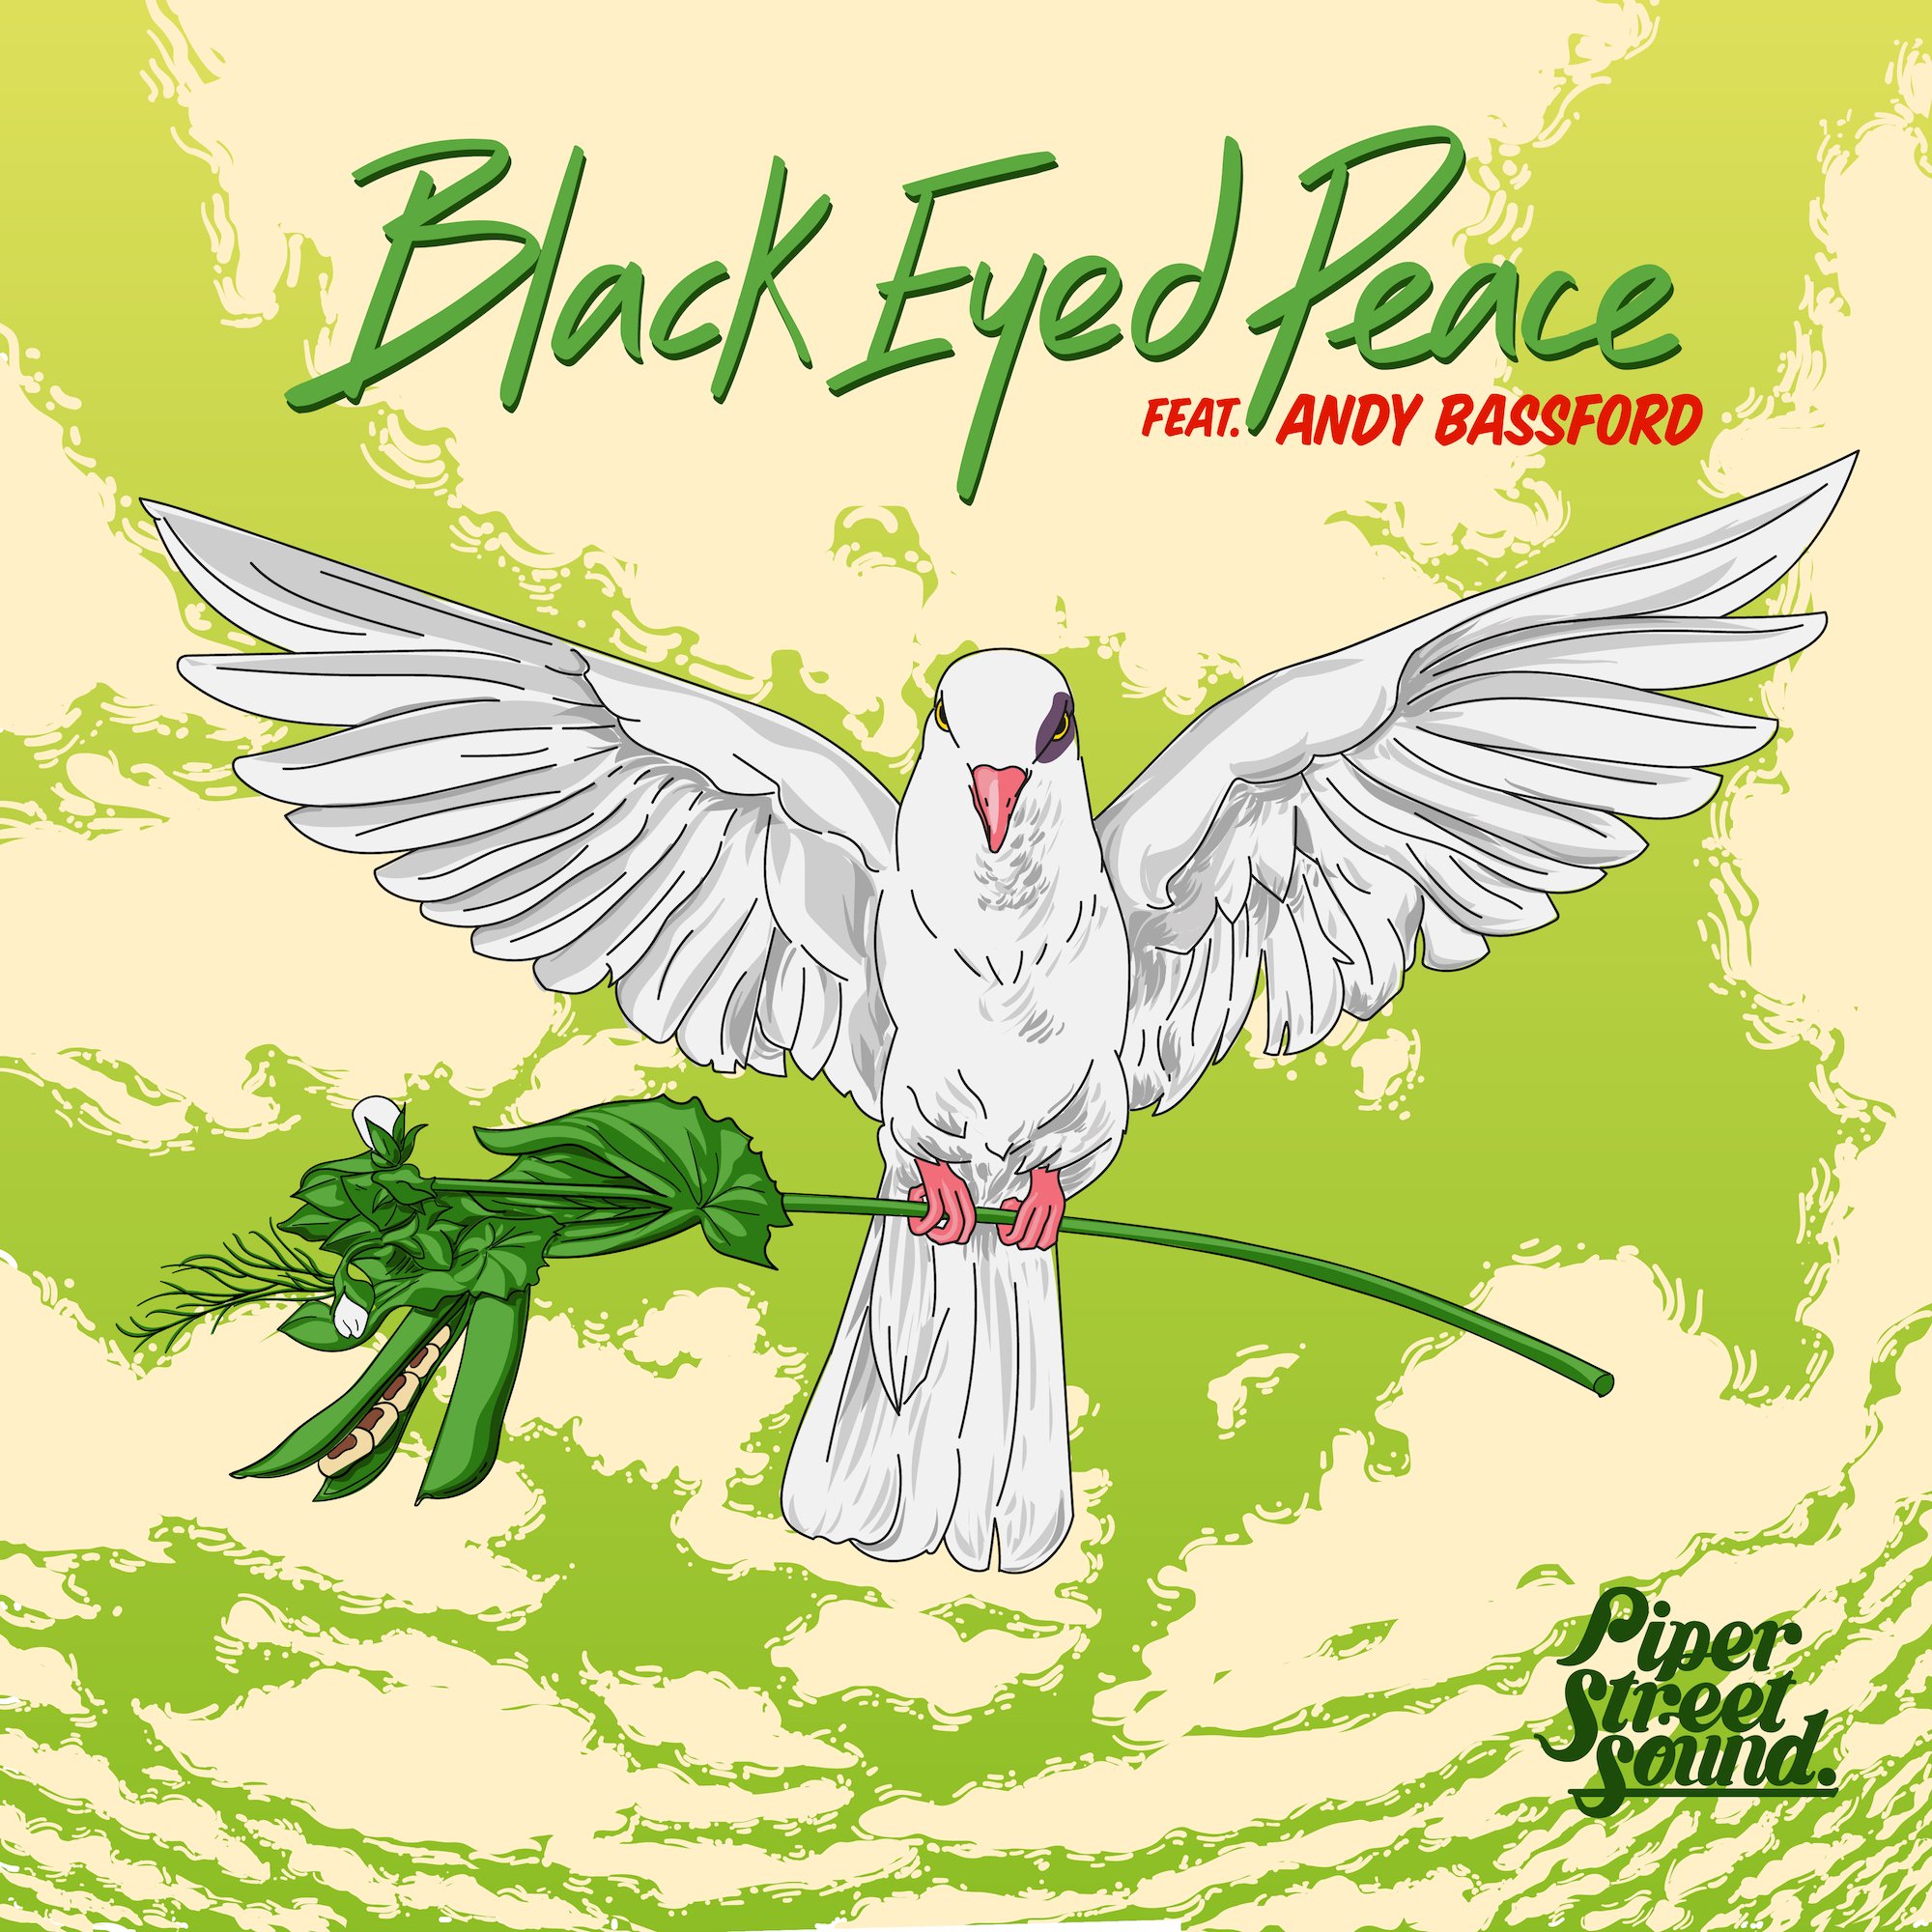 Piper Street Sound ft. Andy Bassford - Black Eyed Peace - Cover Art 2000X.jpg